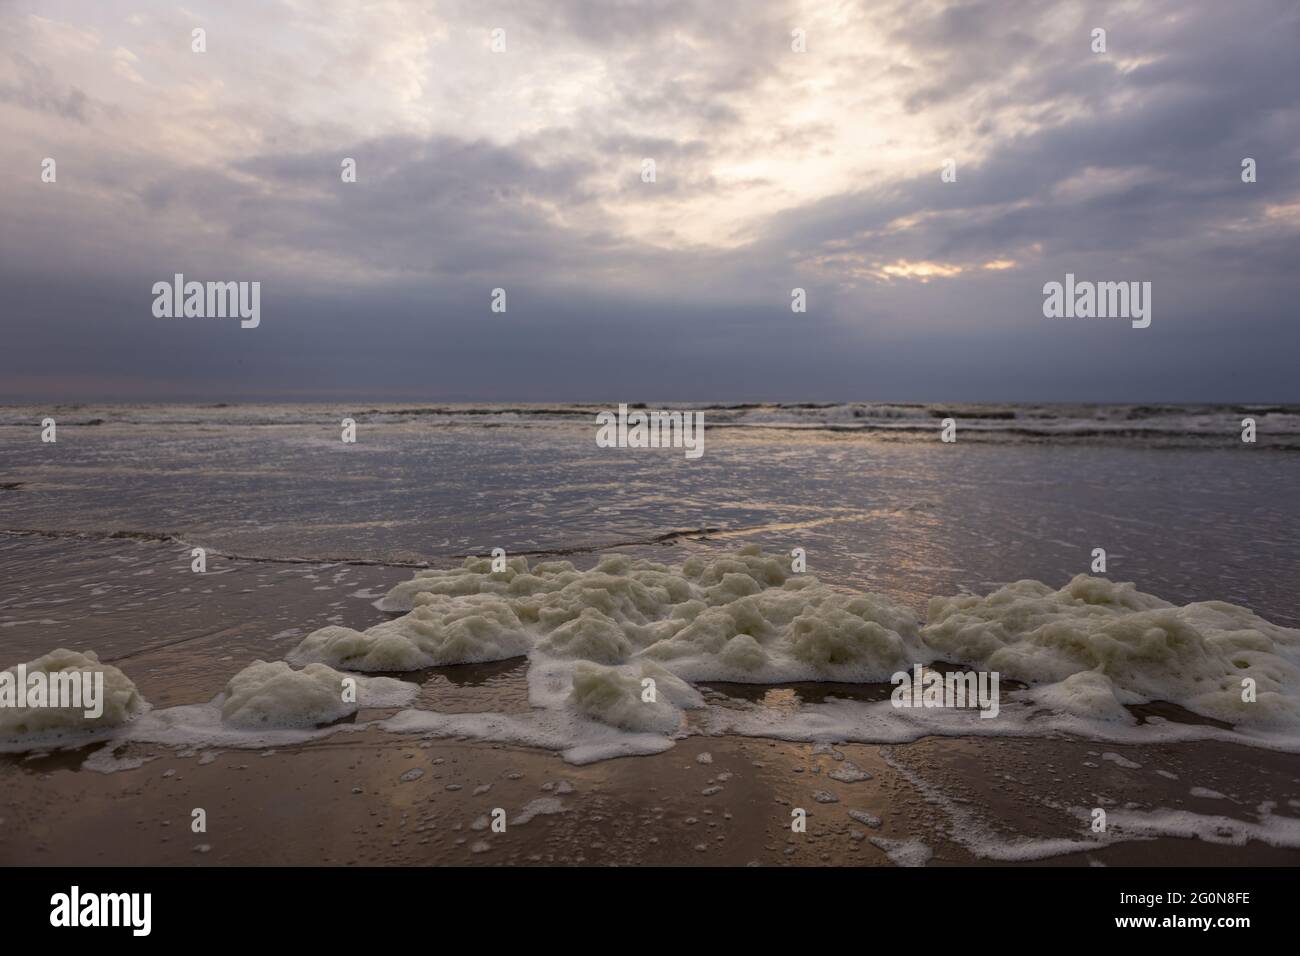 Beach in The Netherlands with stranded air bubbles Stock Photo